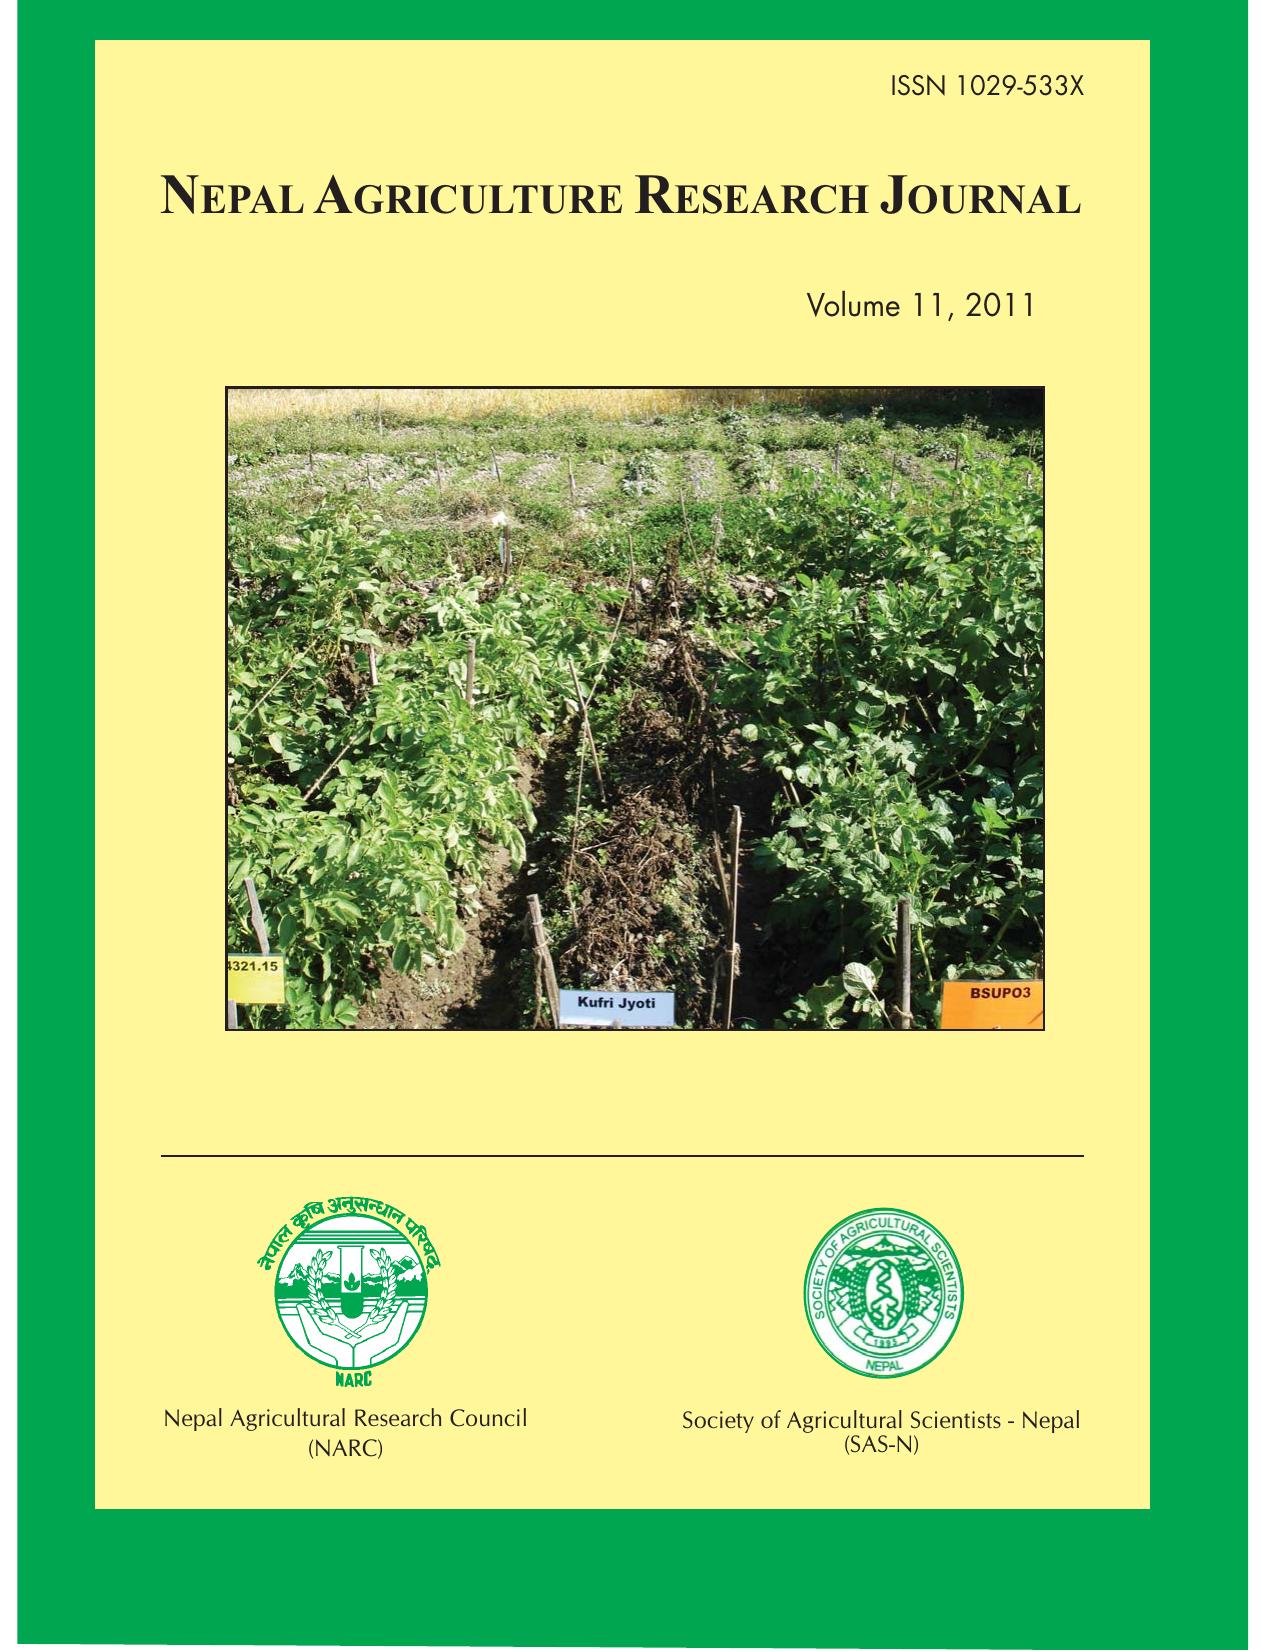 Nepal Agriculture Research Journal Vol11